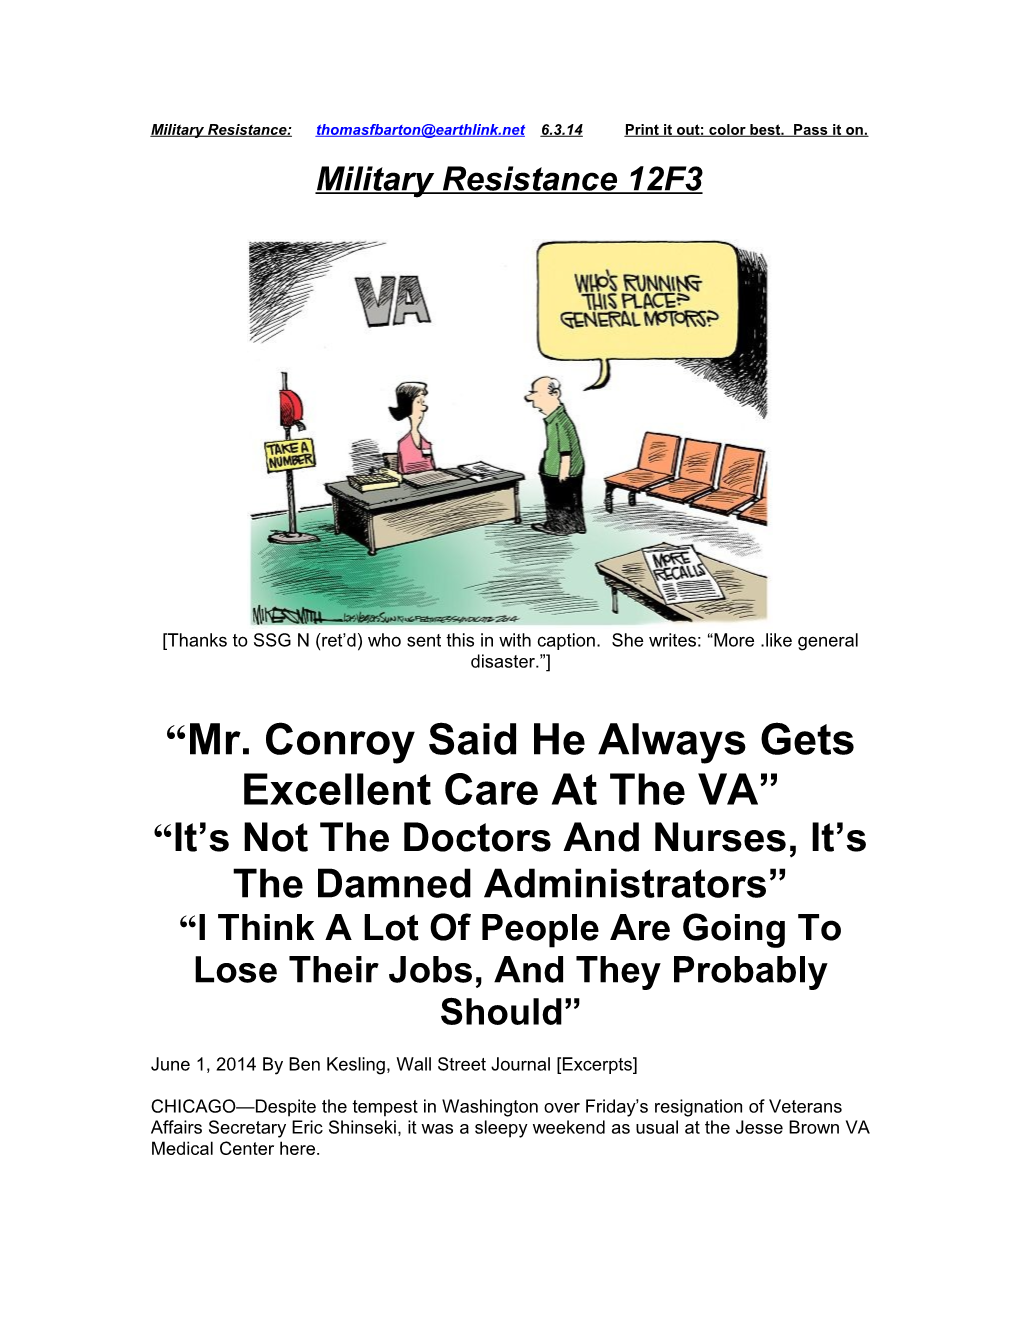 Mr. Conroy Said He Always Gets Excellent Care at the VA